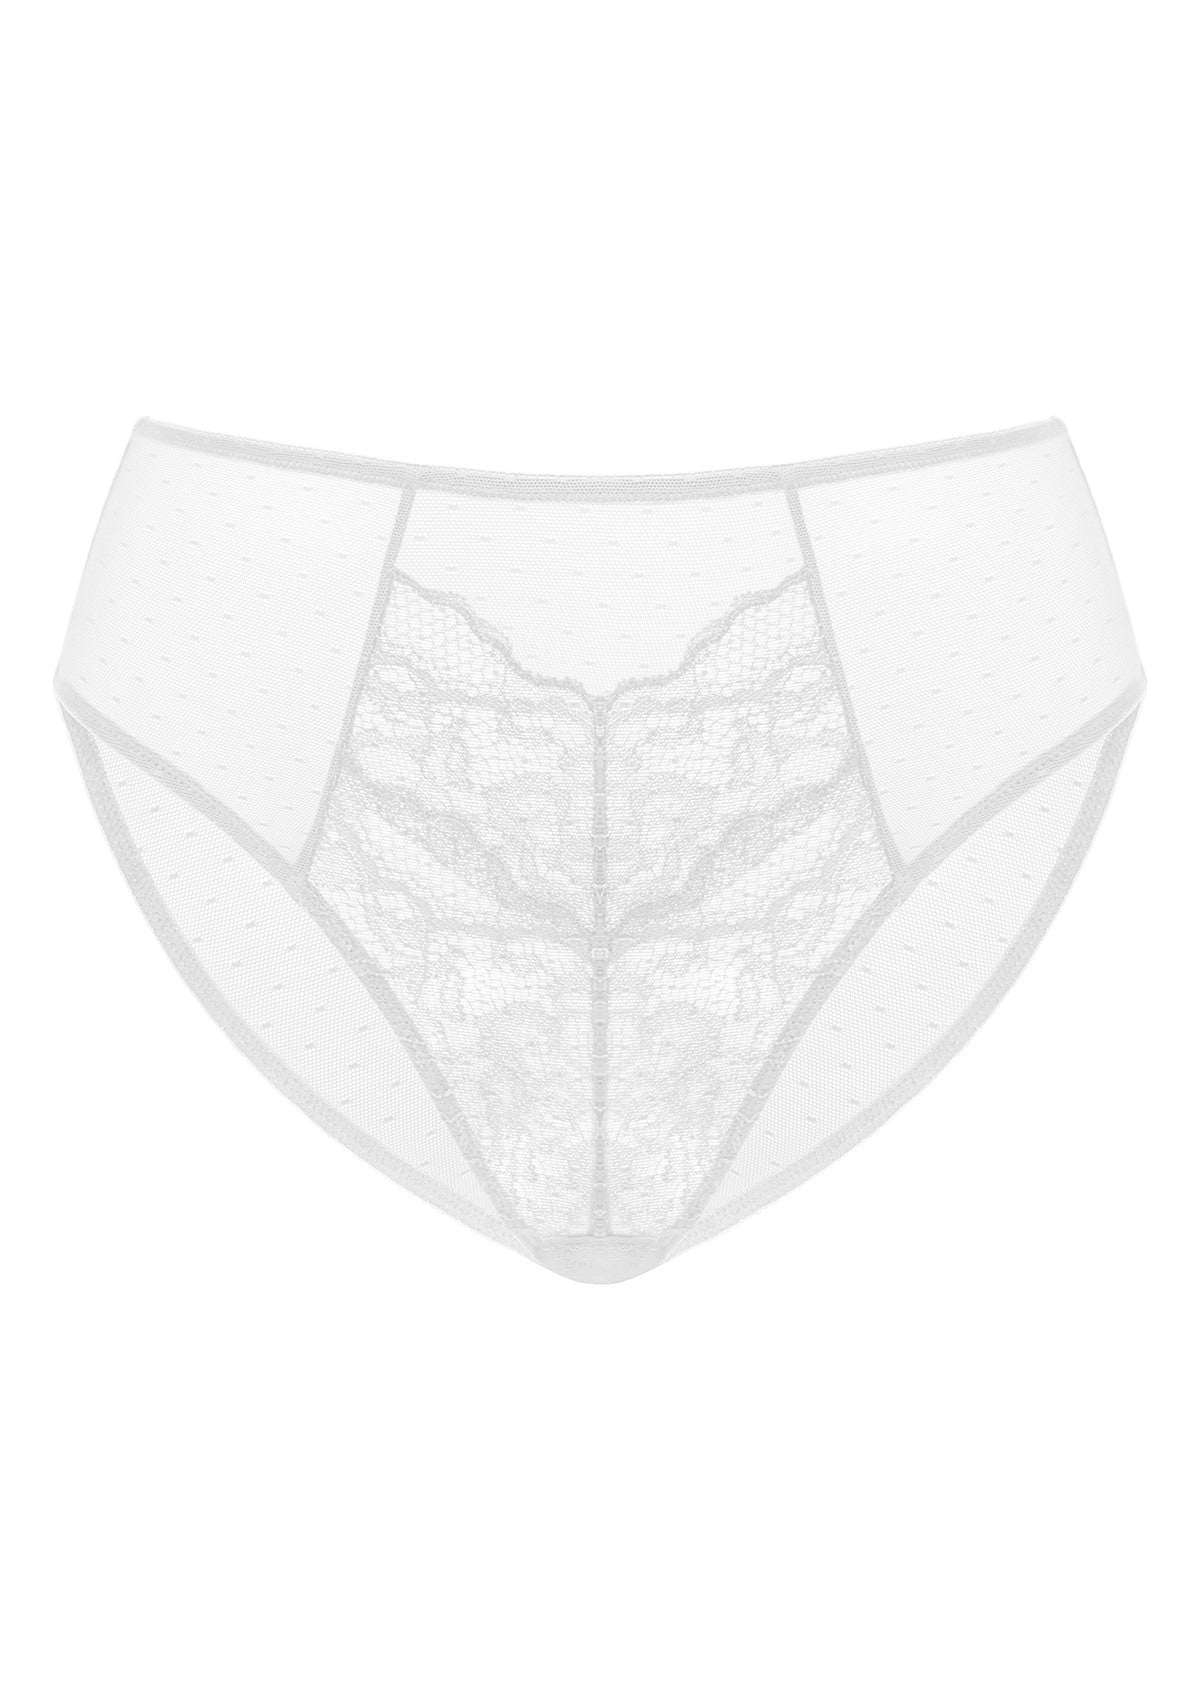 HSIA Enchante High-Rise Floral Lacy Panty-Comfort In Style - L / White